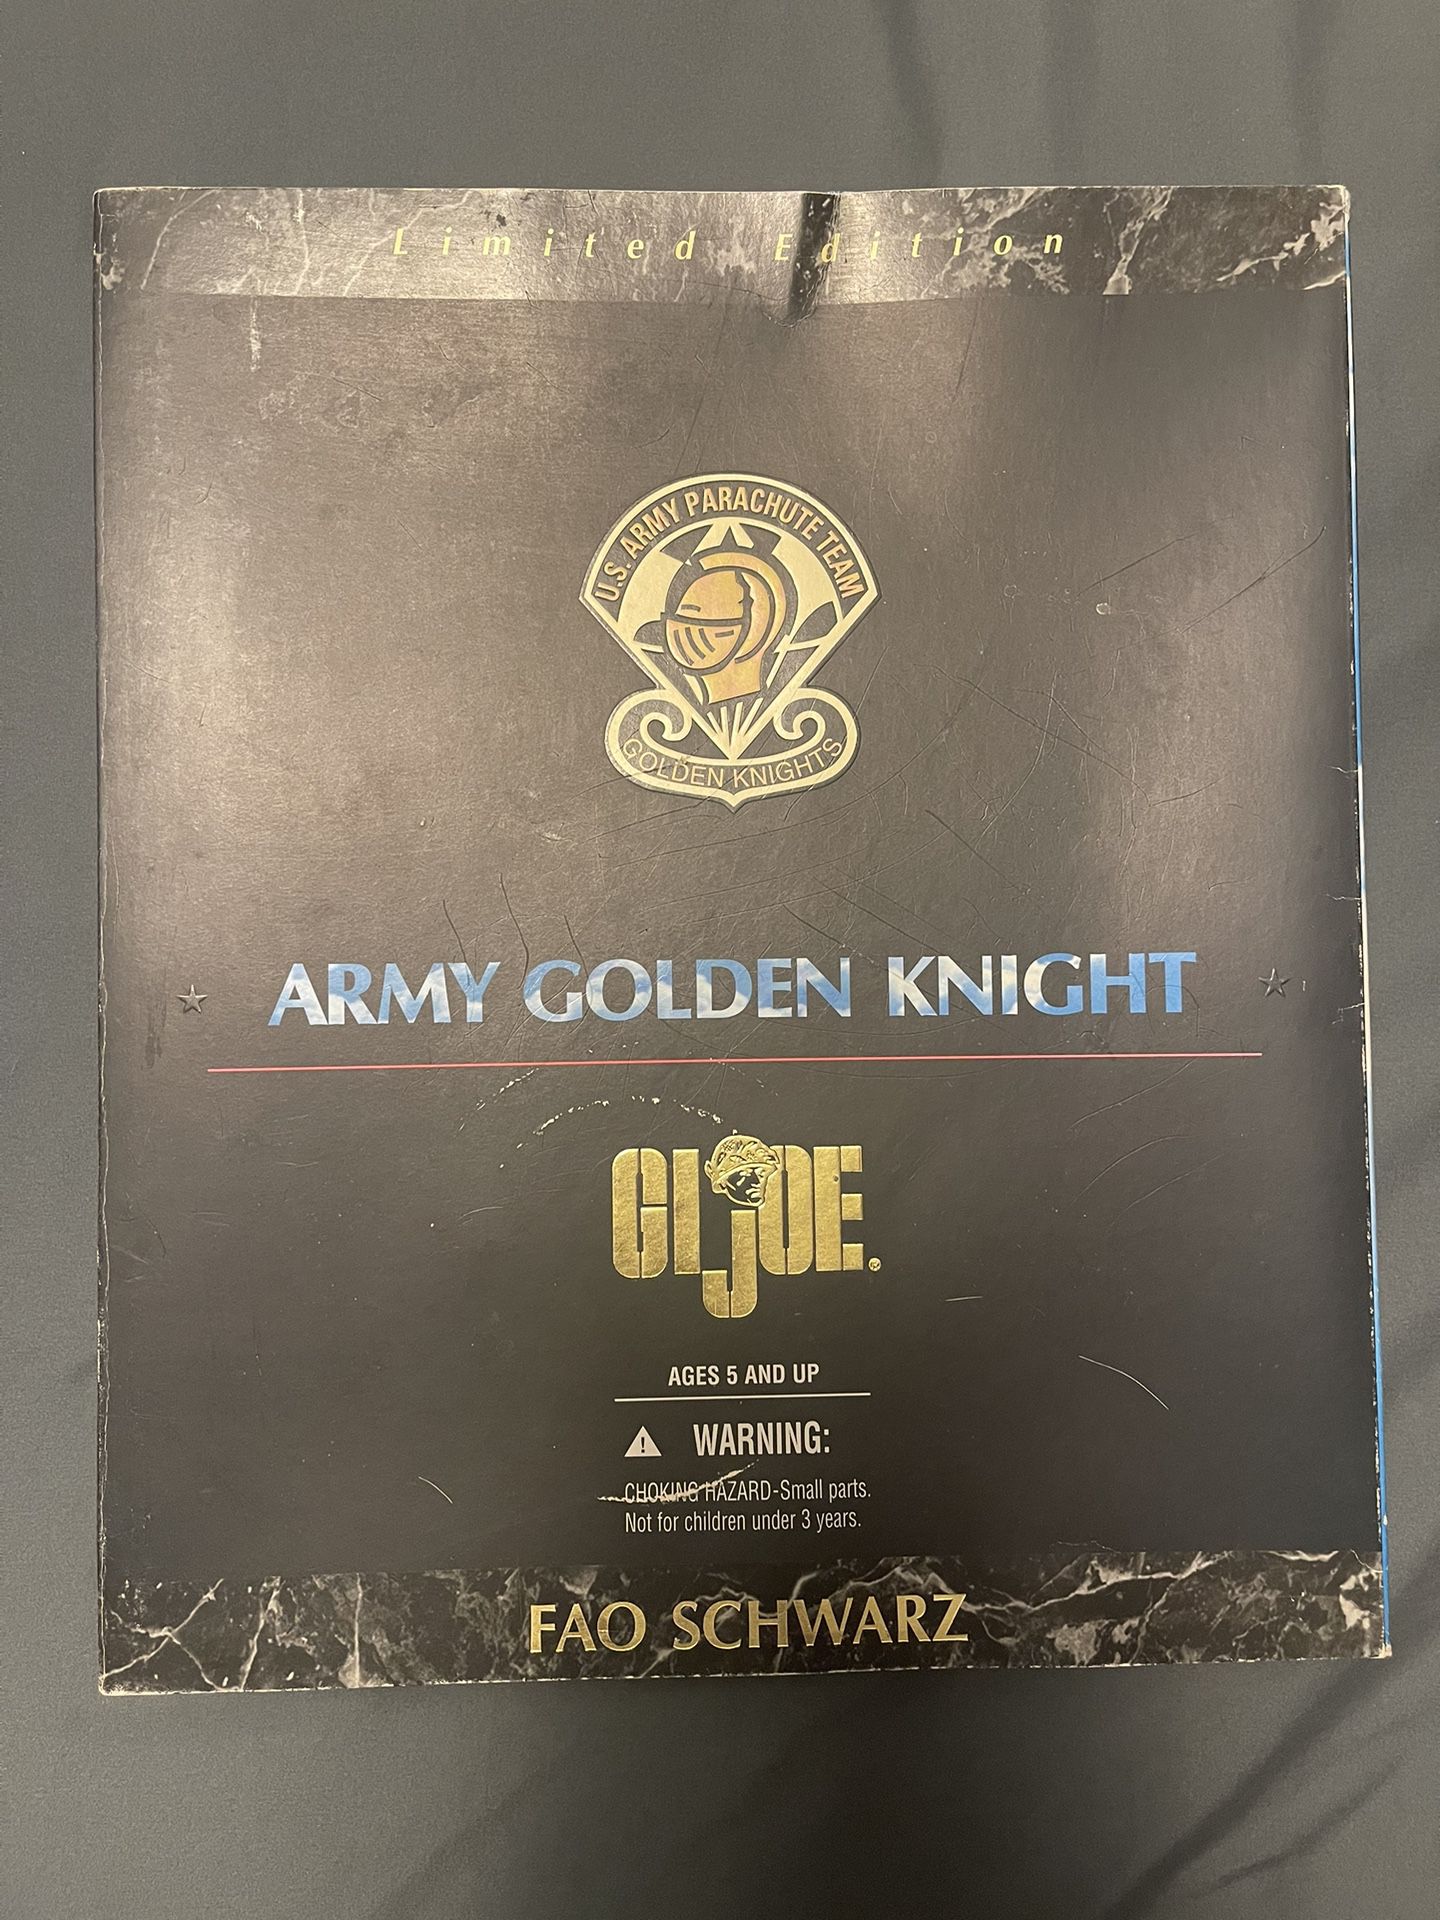 G.I. Joe - Limited Edition Army Golden Knight - Fao Schwarz for